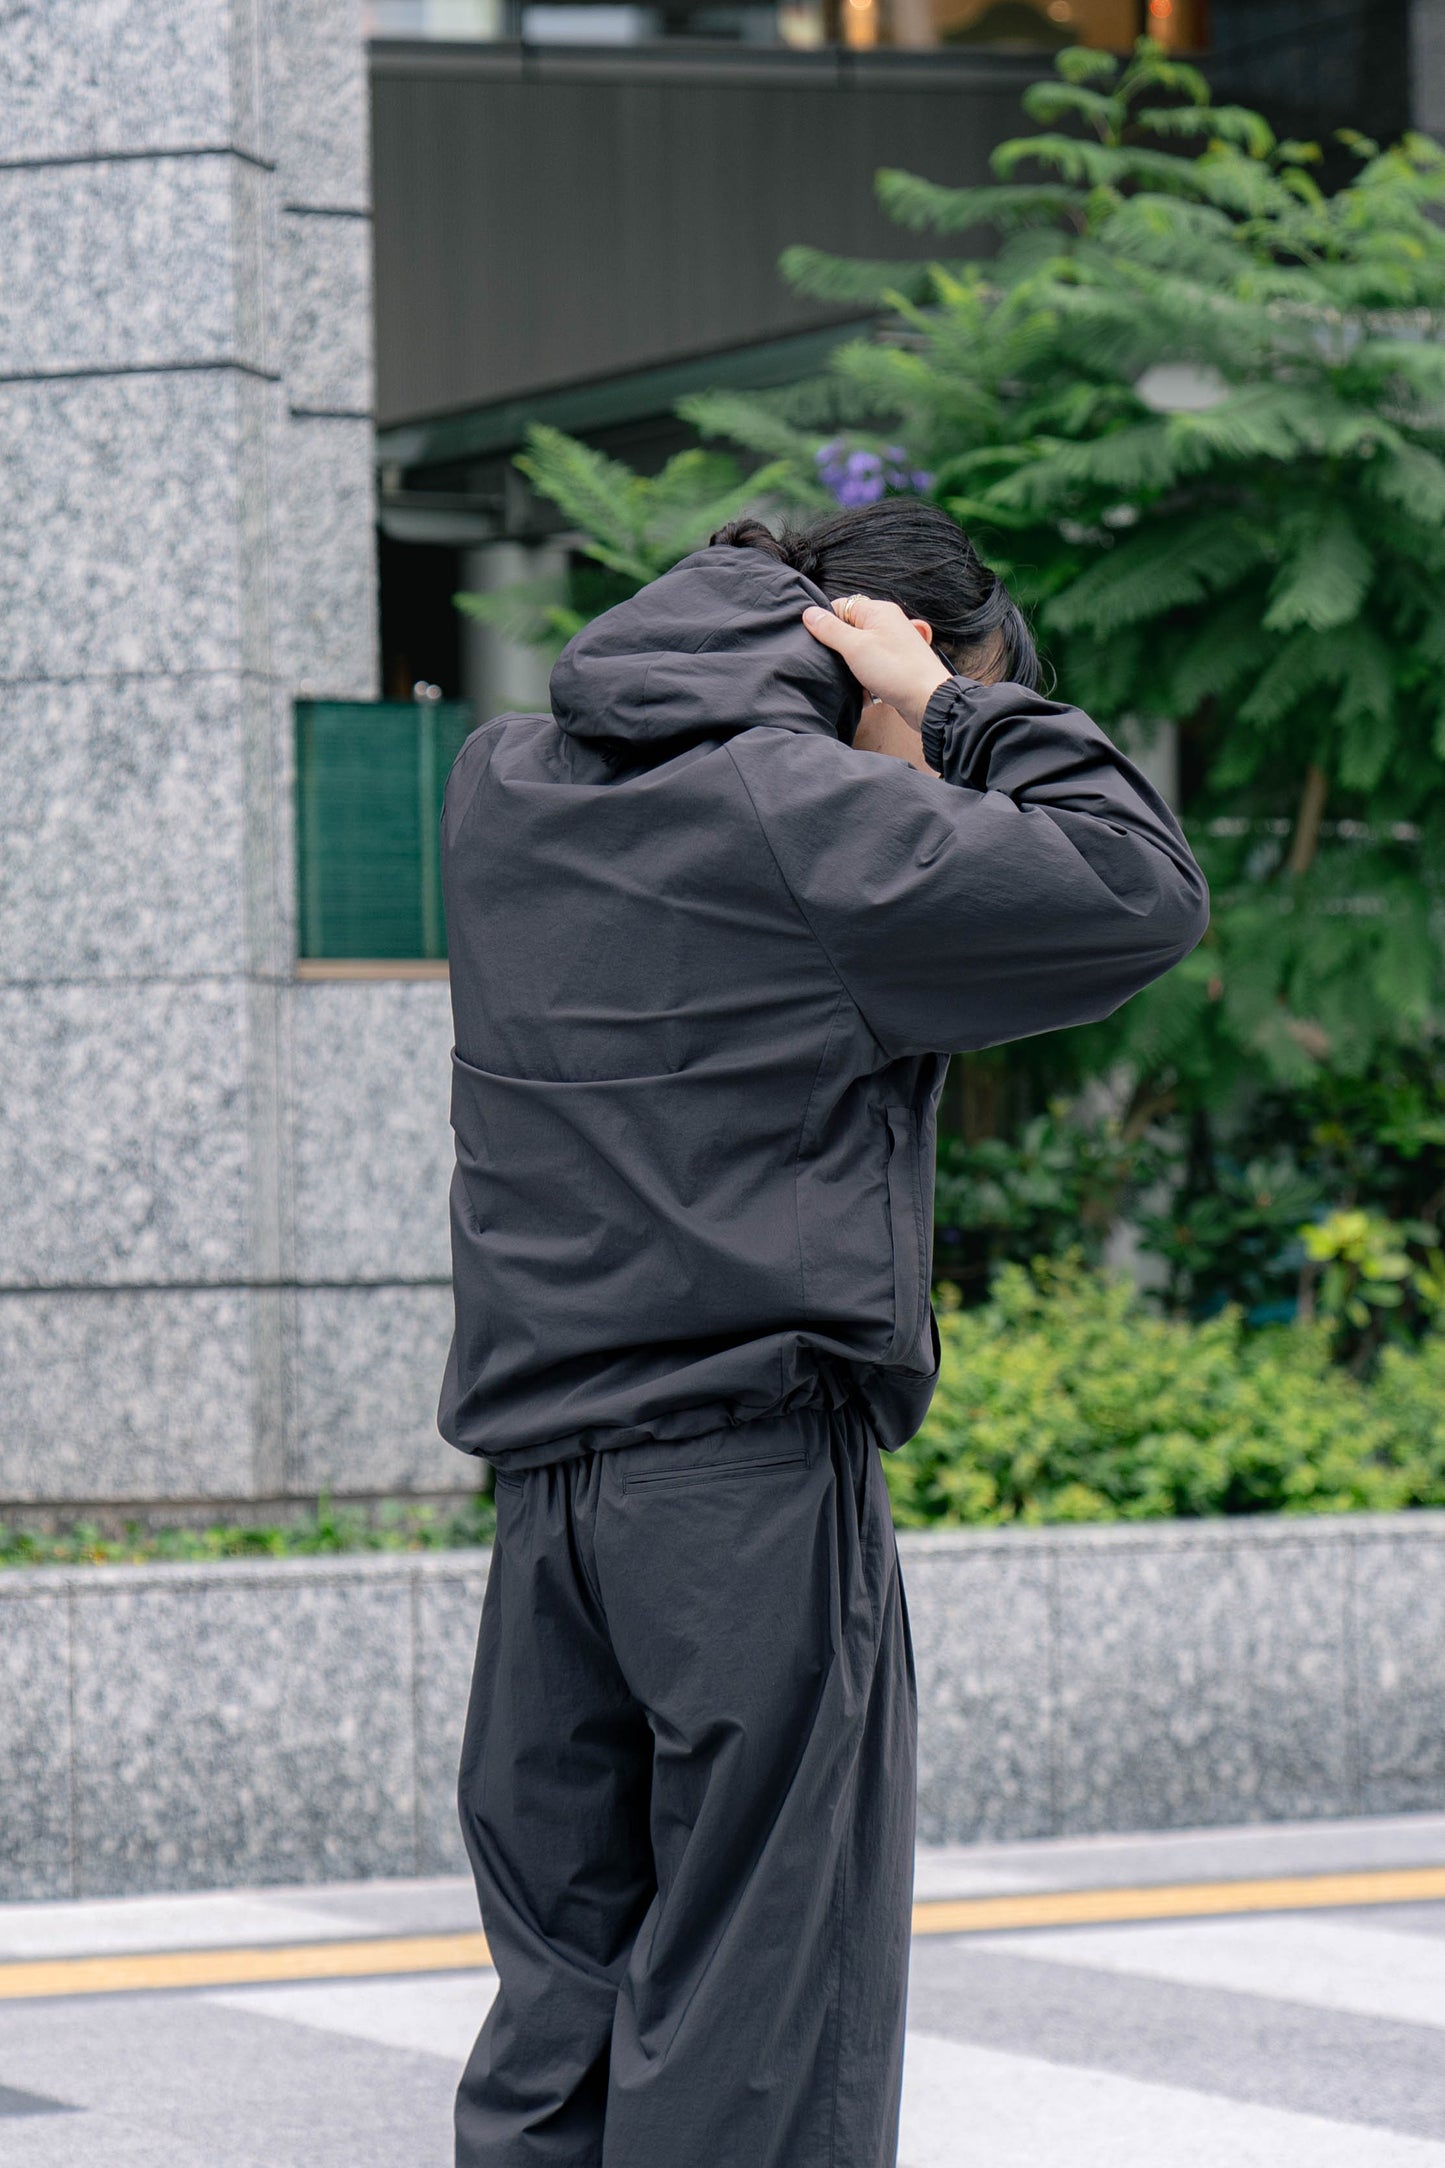 WINDPROOF NYLON HOODED PULLOVER